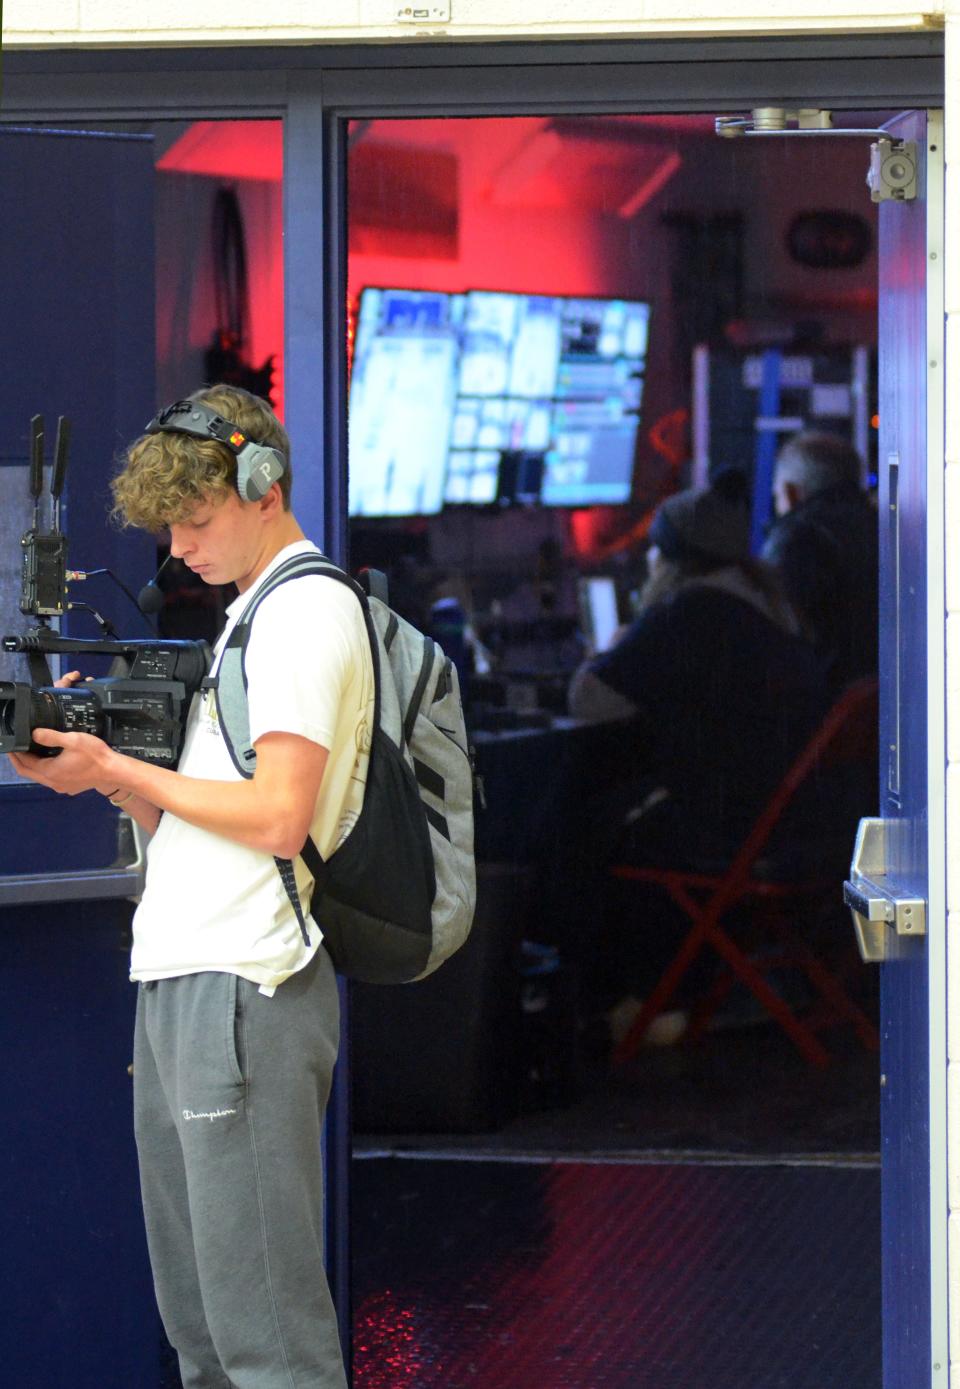 Petoskey student and member of the Rambler Sports Network team, Peyton Harmon, works a camera during a basketball game broadcast recently, as other members of RSN work in the production trailer pulled up to the doors of the Boyne City High School gym.